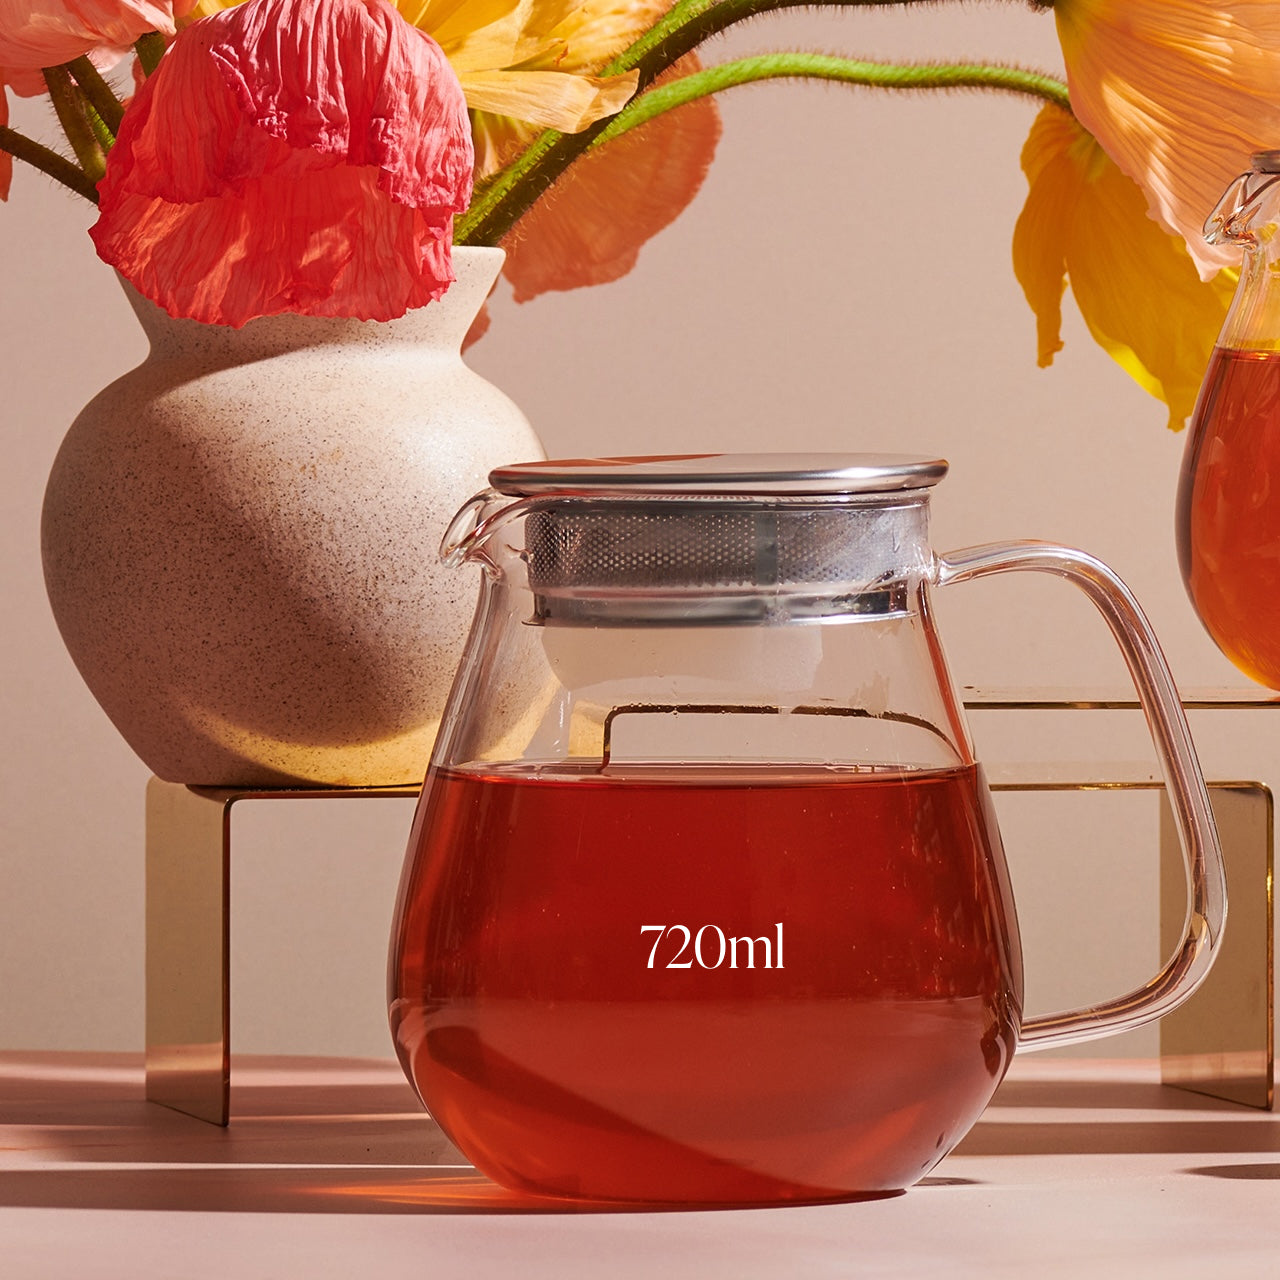 A Kinto One Touch Teapot marked "720ml" filled with red liquid, possibly Magic Hour Tea, sits on a table. Behind it, there is a ceramic vase holding vibrant pink and yellow flowers. The scene is well-lit with a soft, warm light.